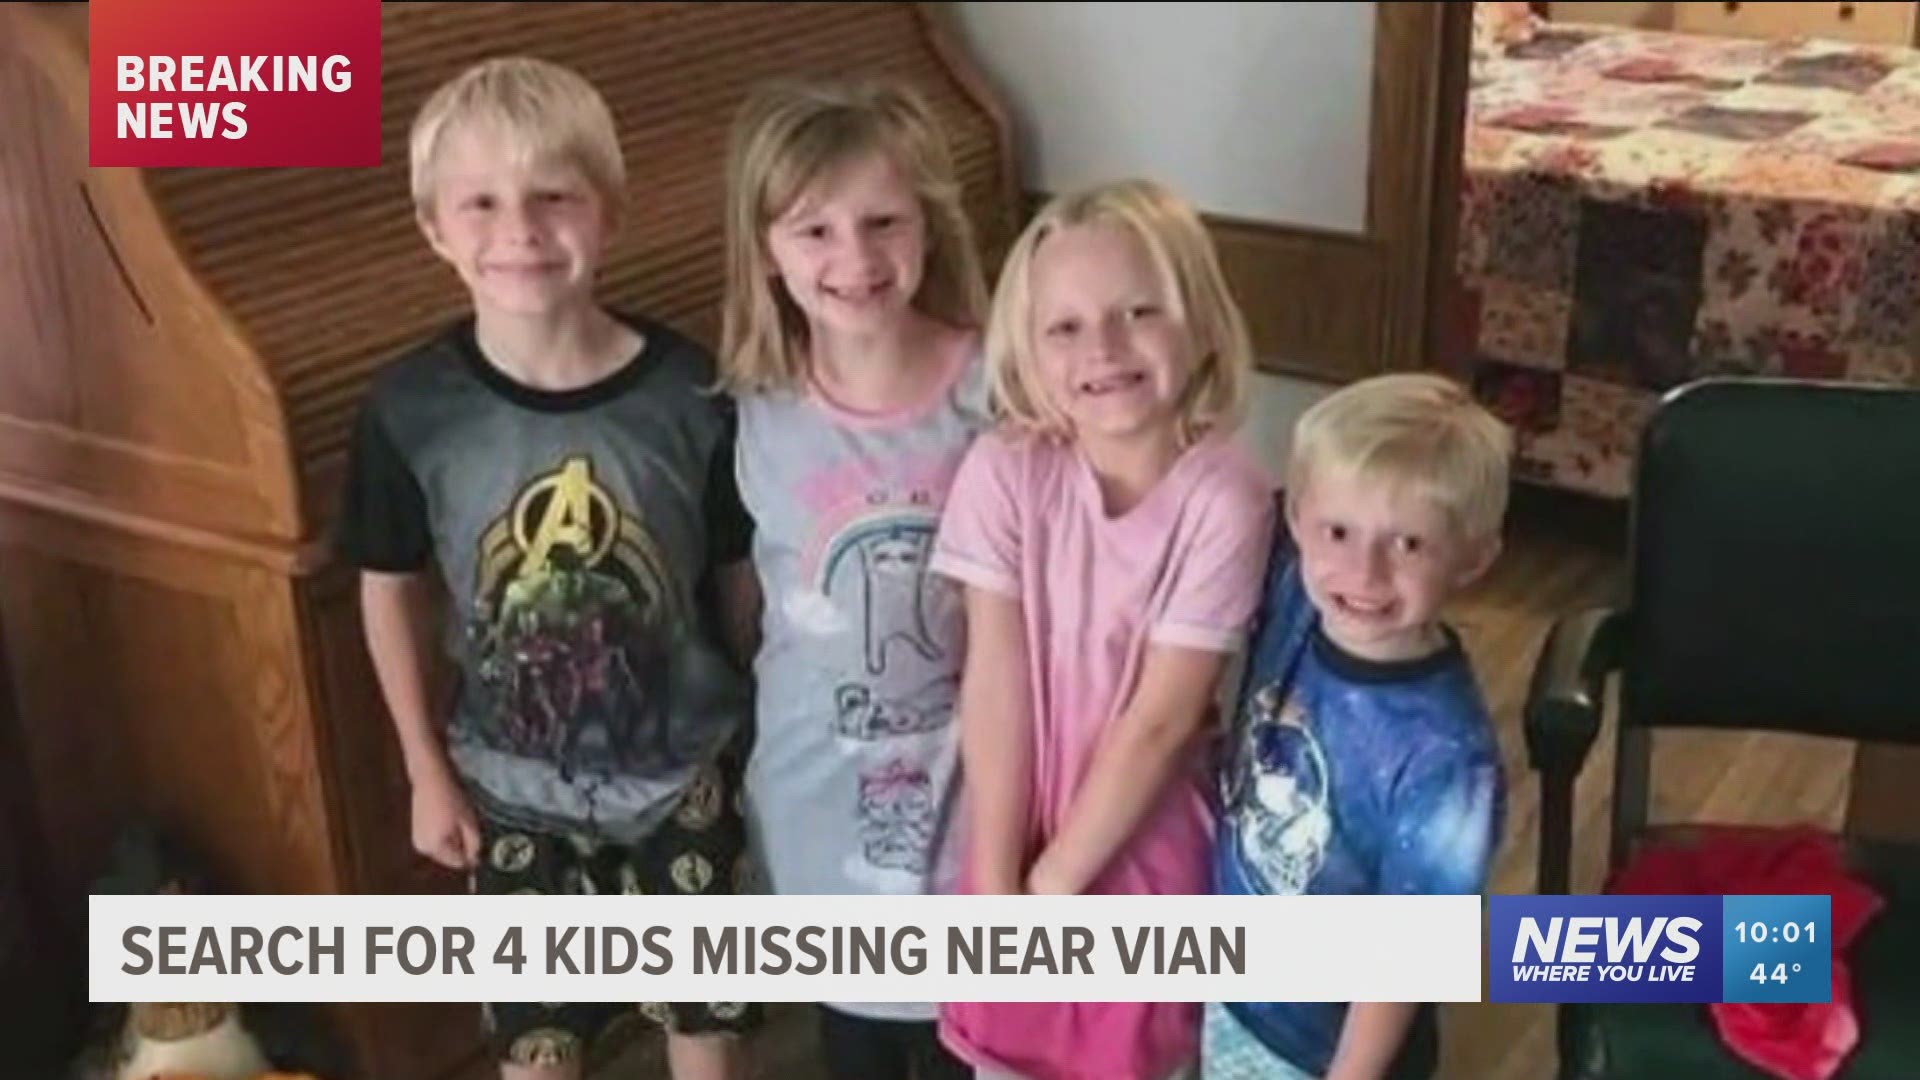 Nathanial, Maria, Adabell and Levi were last seen around 2:30 p.m. Tuesday (Dec. 1) on Moonshine Road just north of Vian. https://bit.ly/3lpF17n